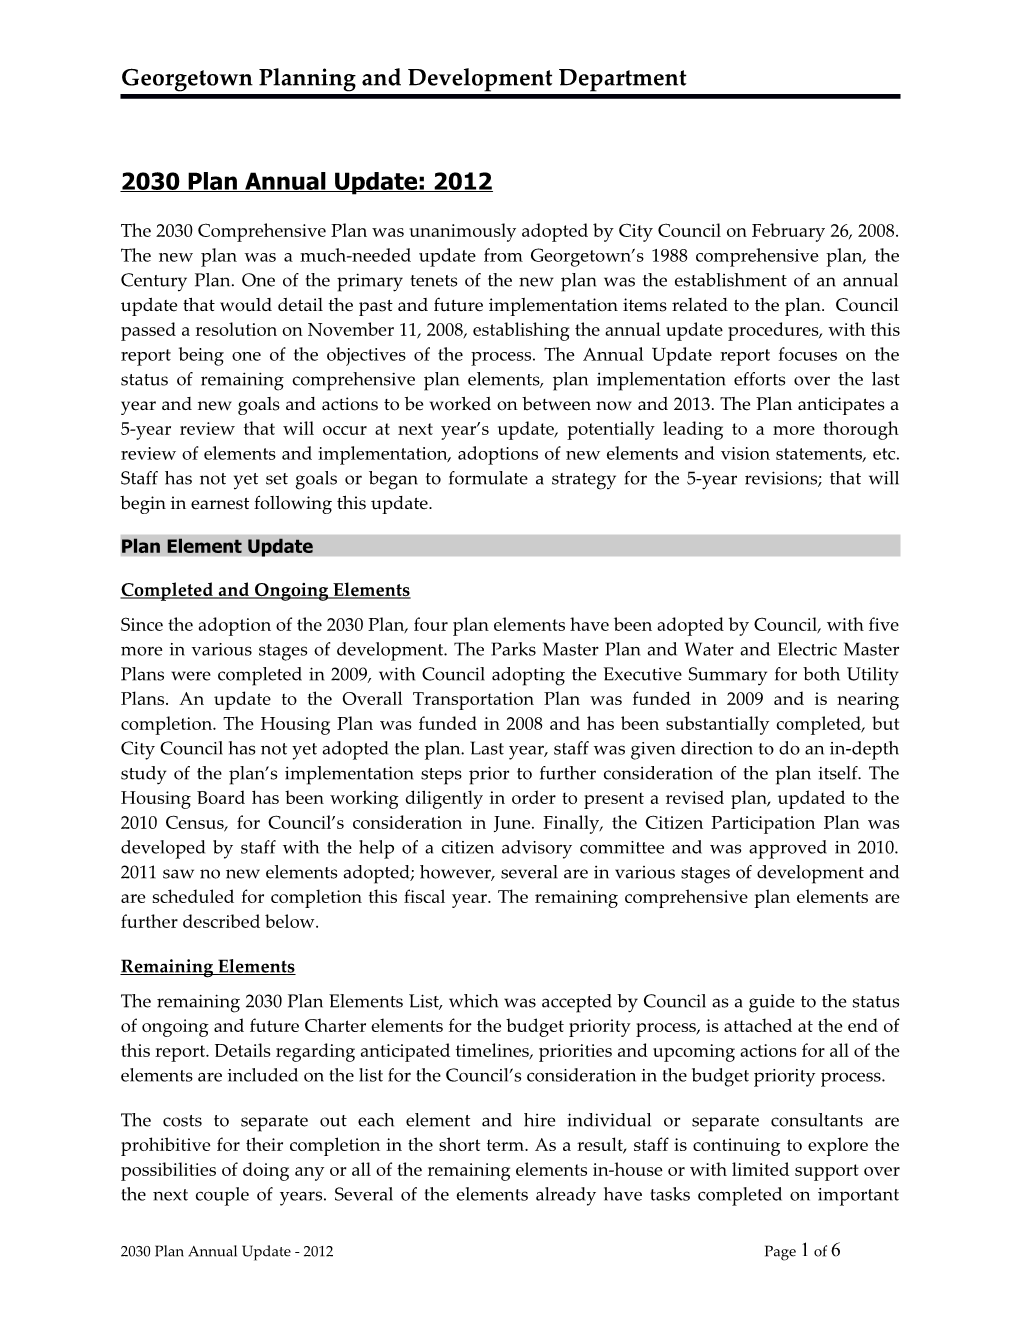 2030 Annual Update for 2009